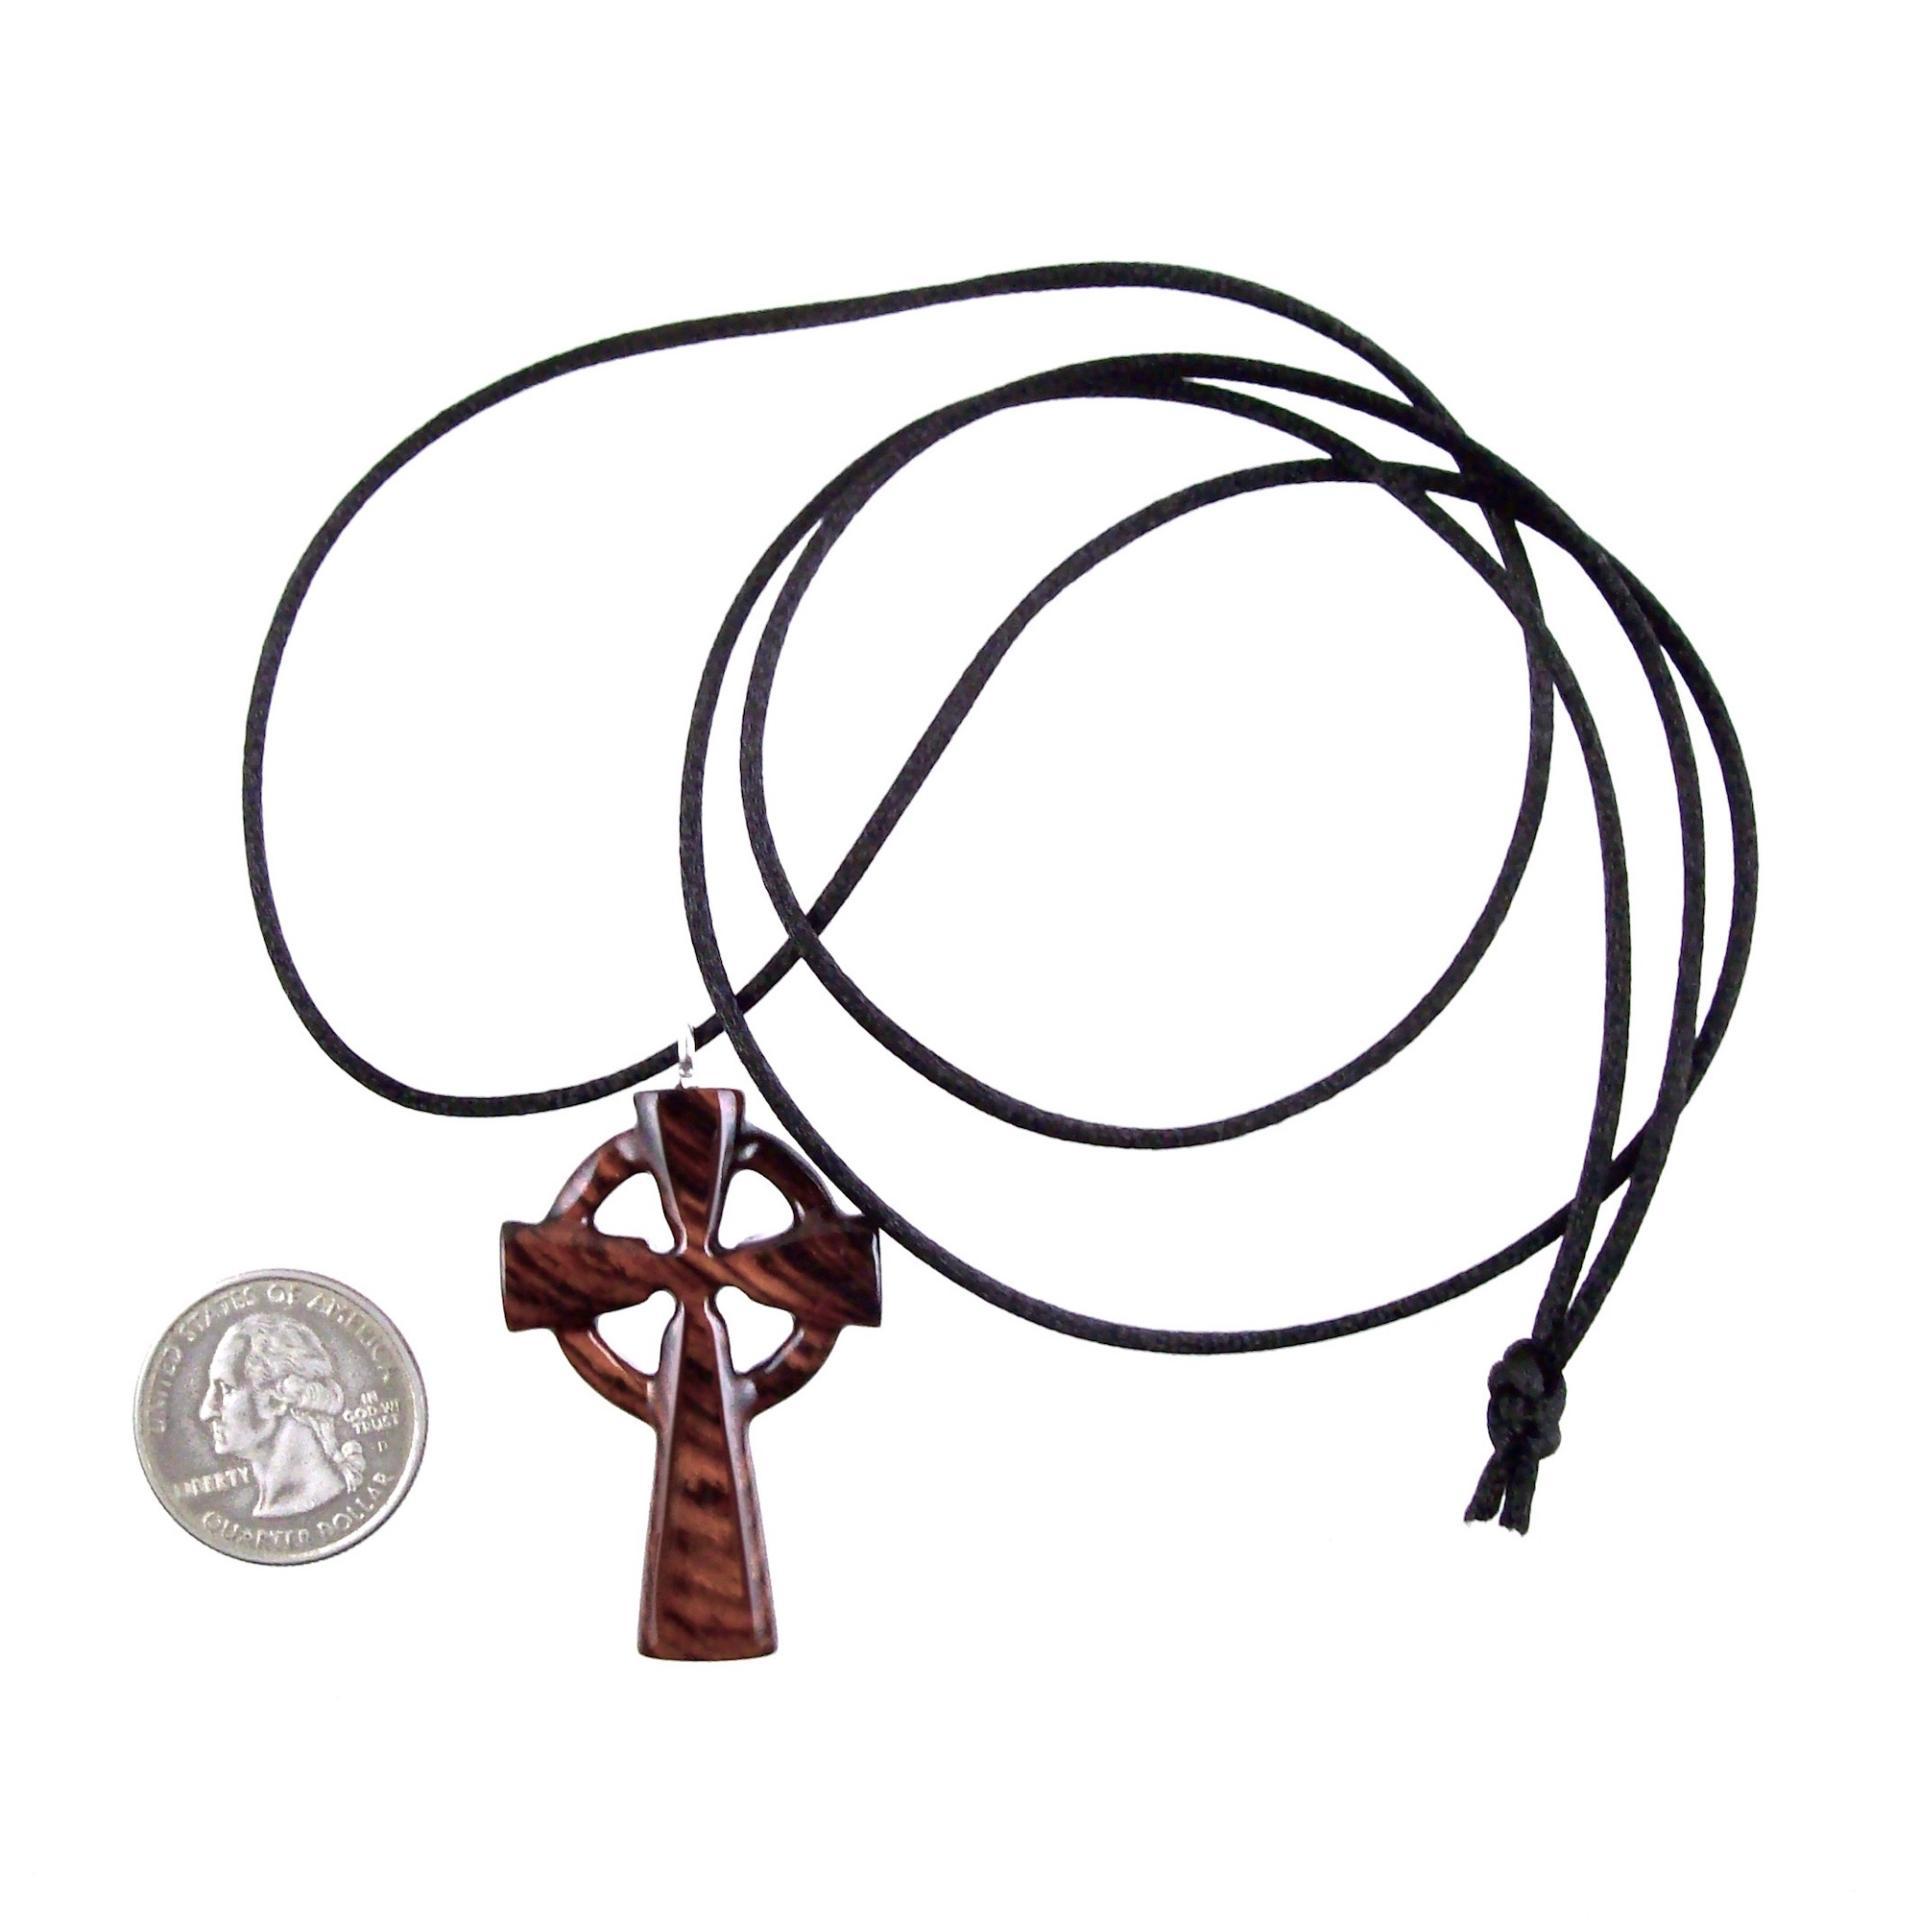 Wooden Celtic Cross Pendant, Hand Carved Celtic Cross Necklace, Wood Cross Necklace Gift for Him, Irish Christian Jewelry